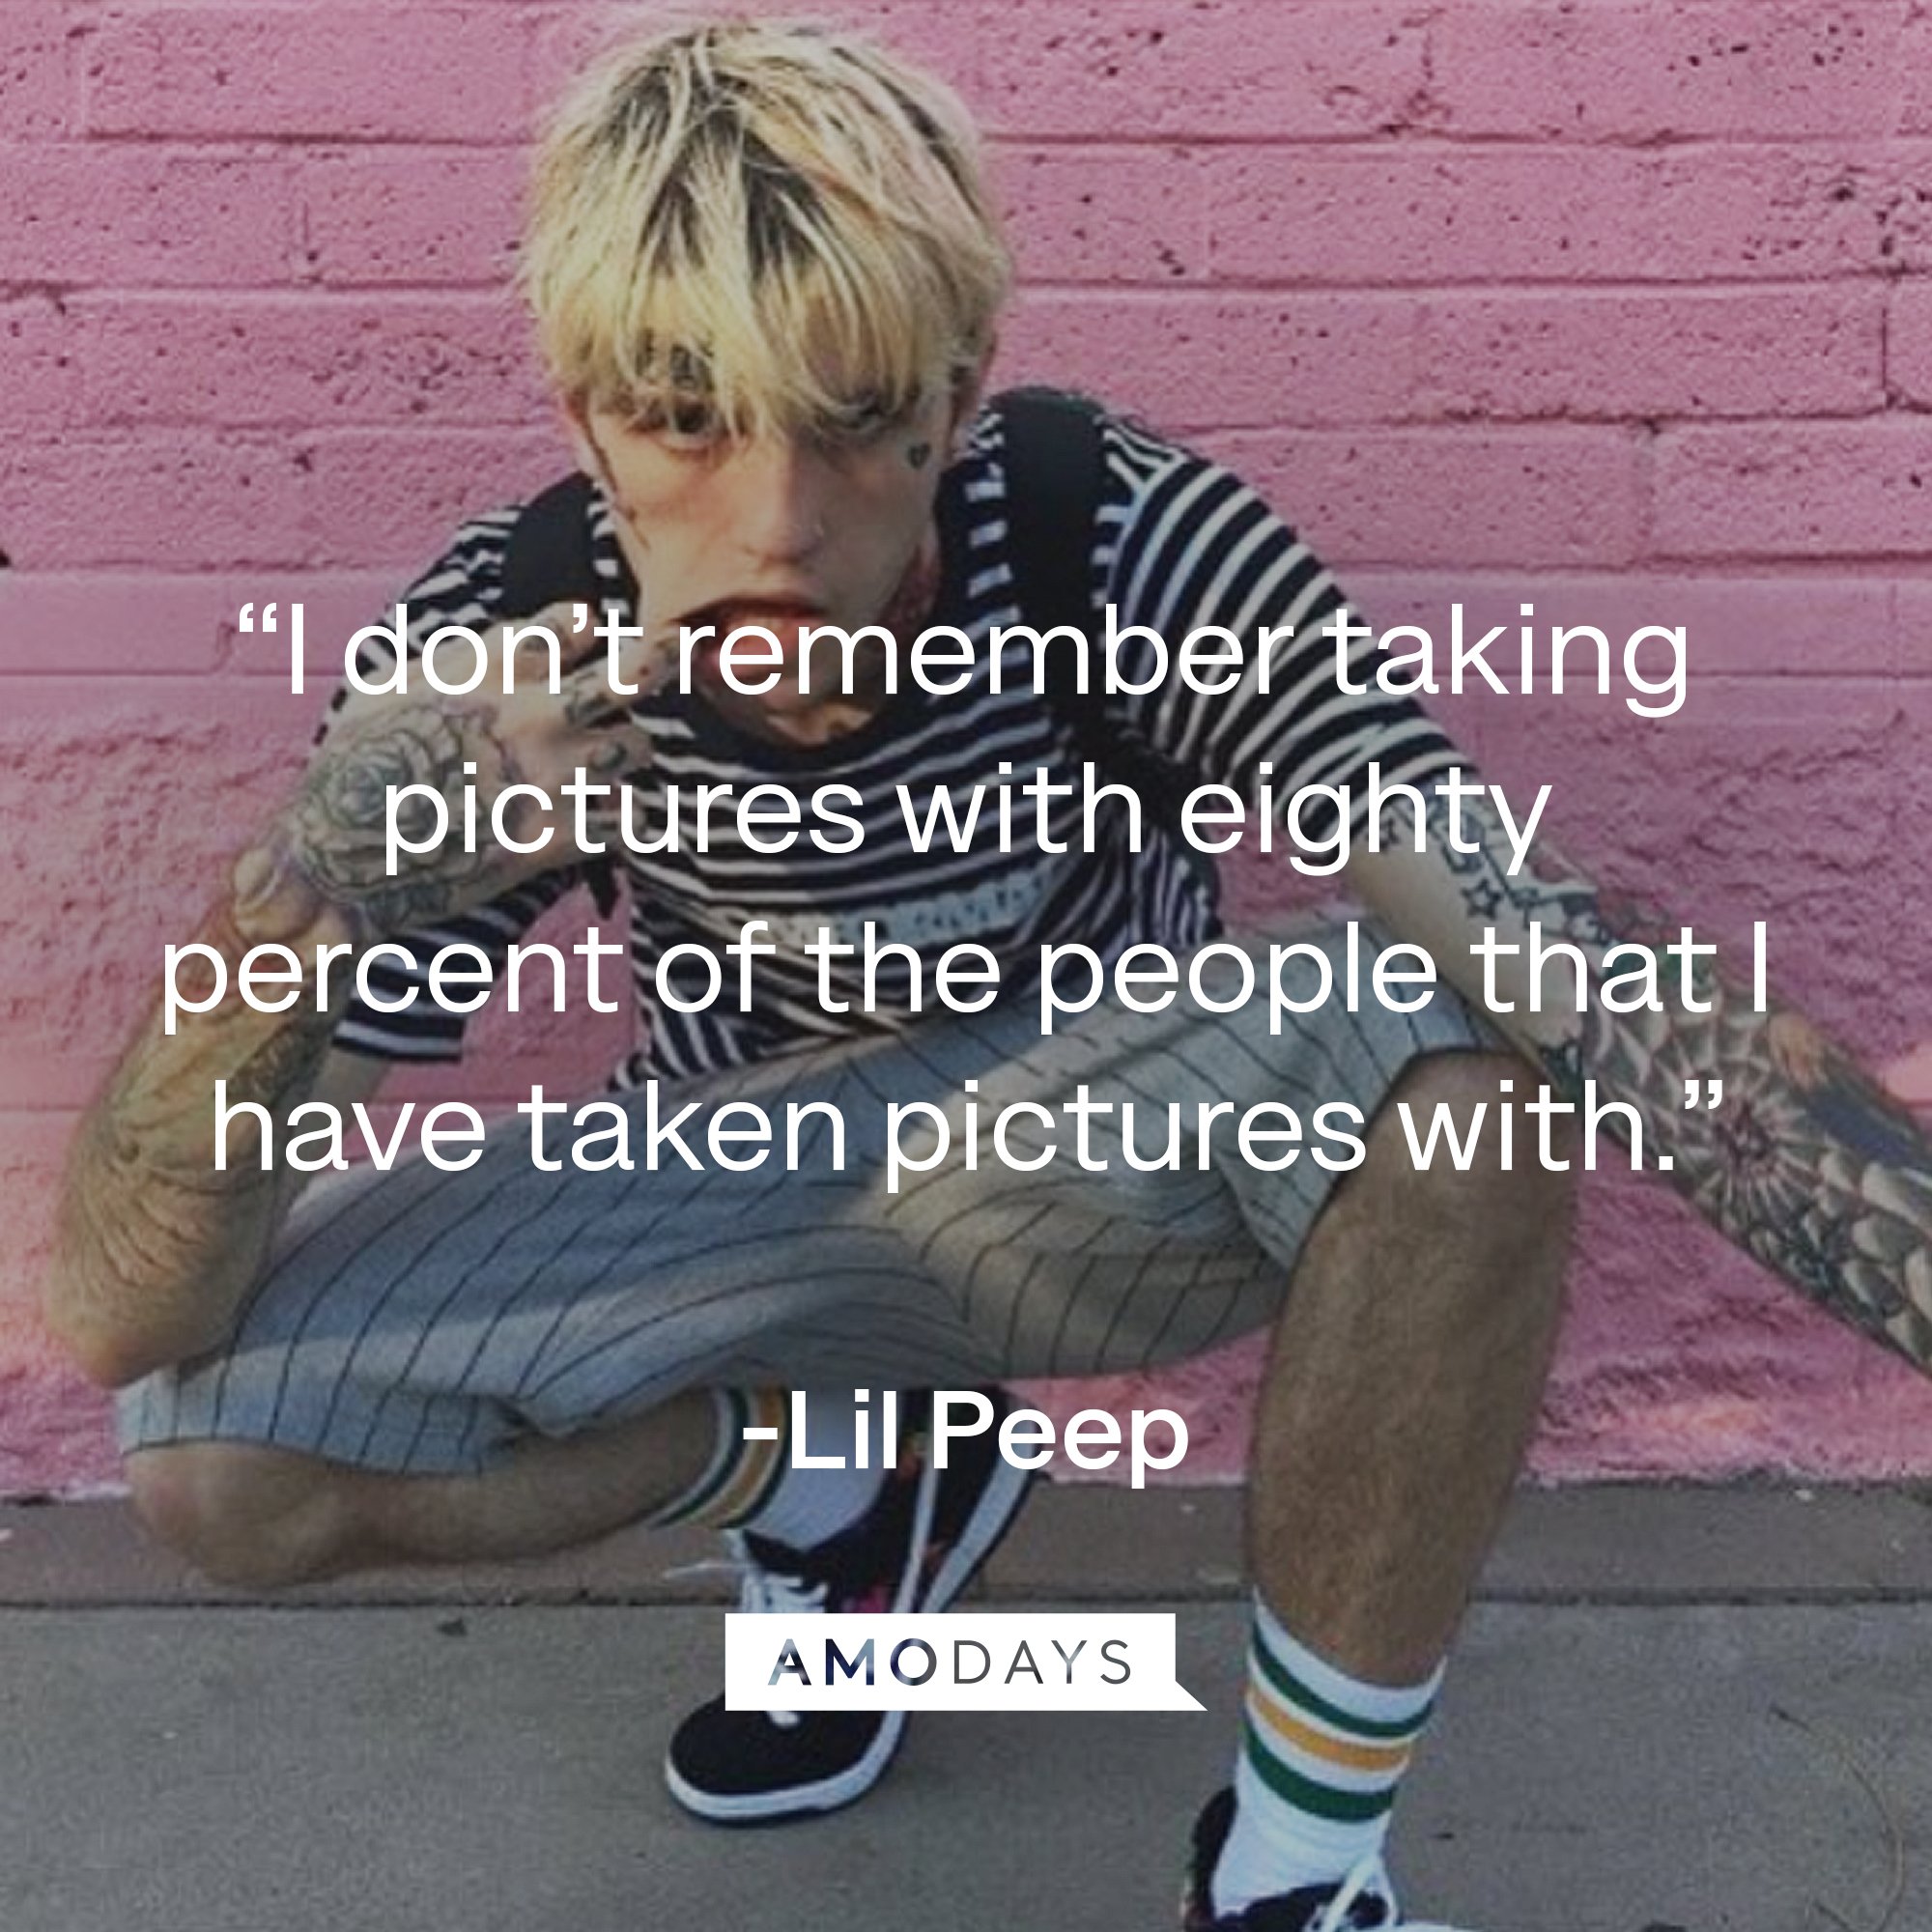 Lil Peep's quote: “I don’t remember taking pictures with eighty percent of the people that I have taken pictures with.” | Image: AmoDays